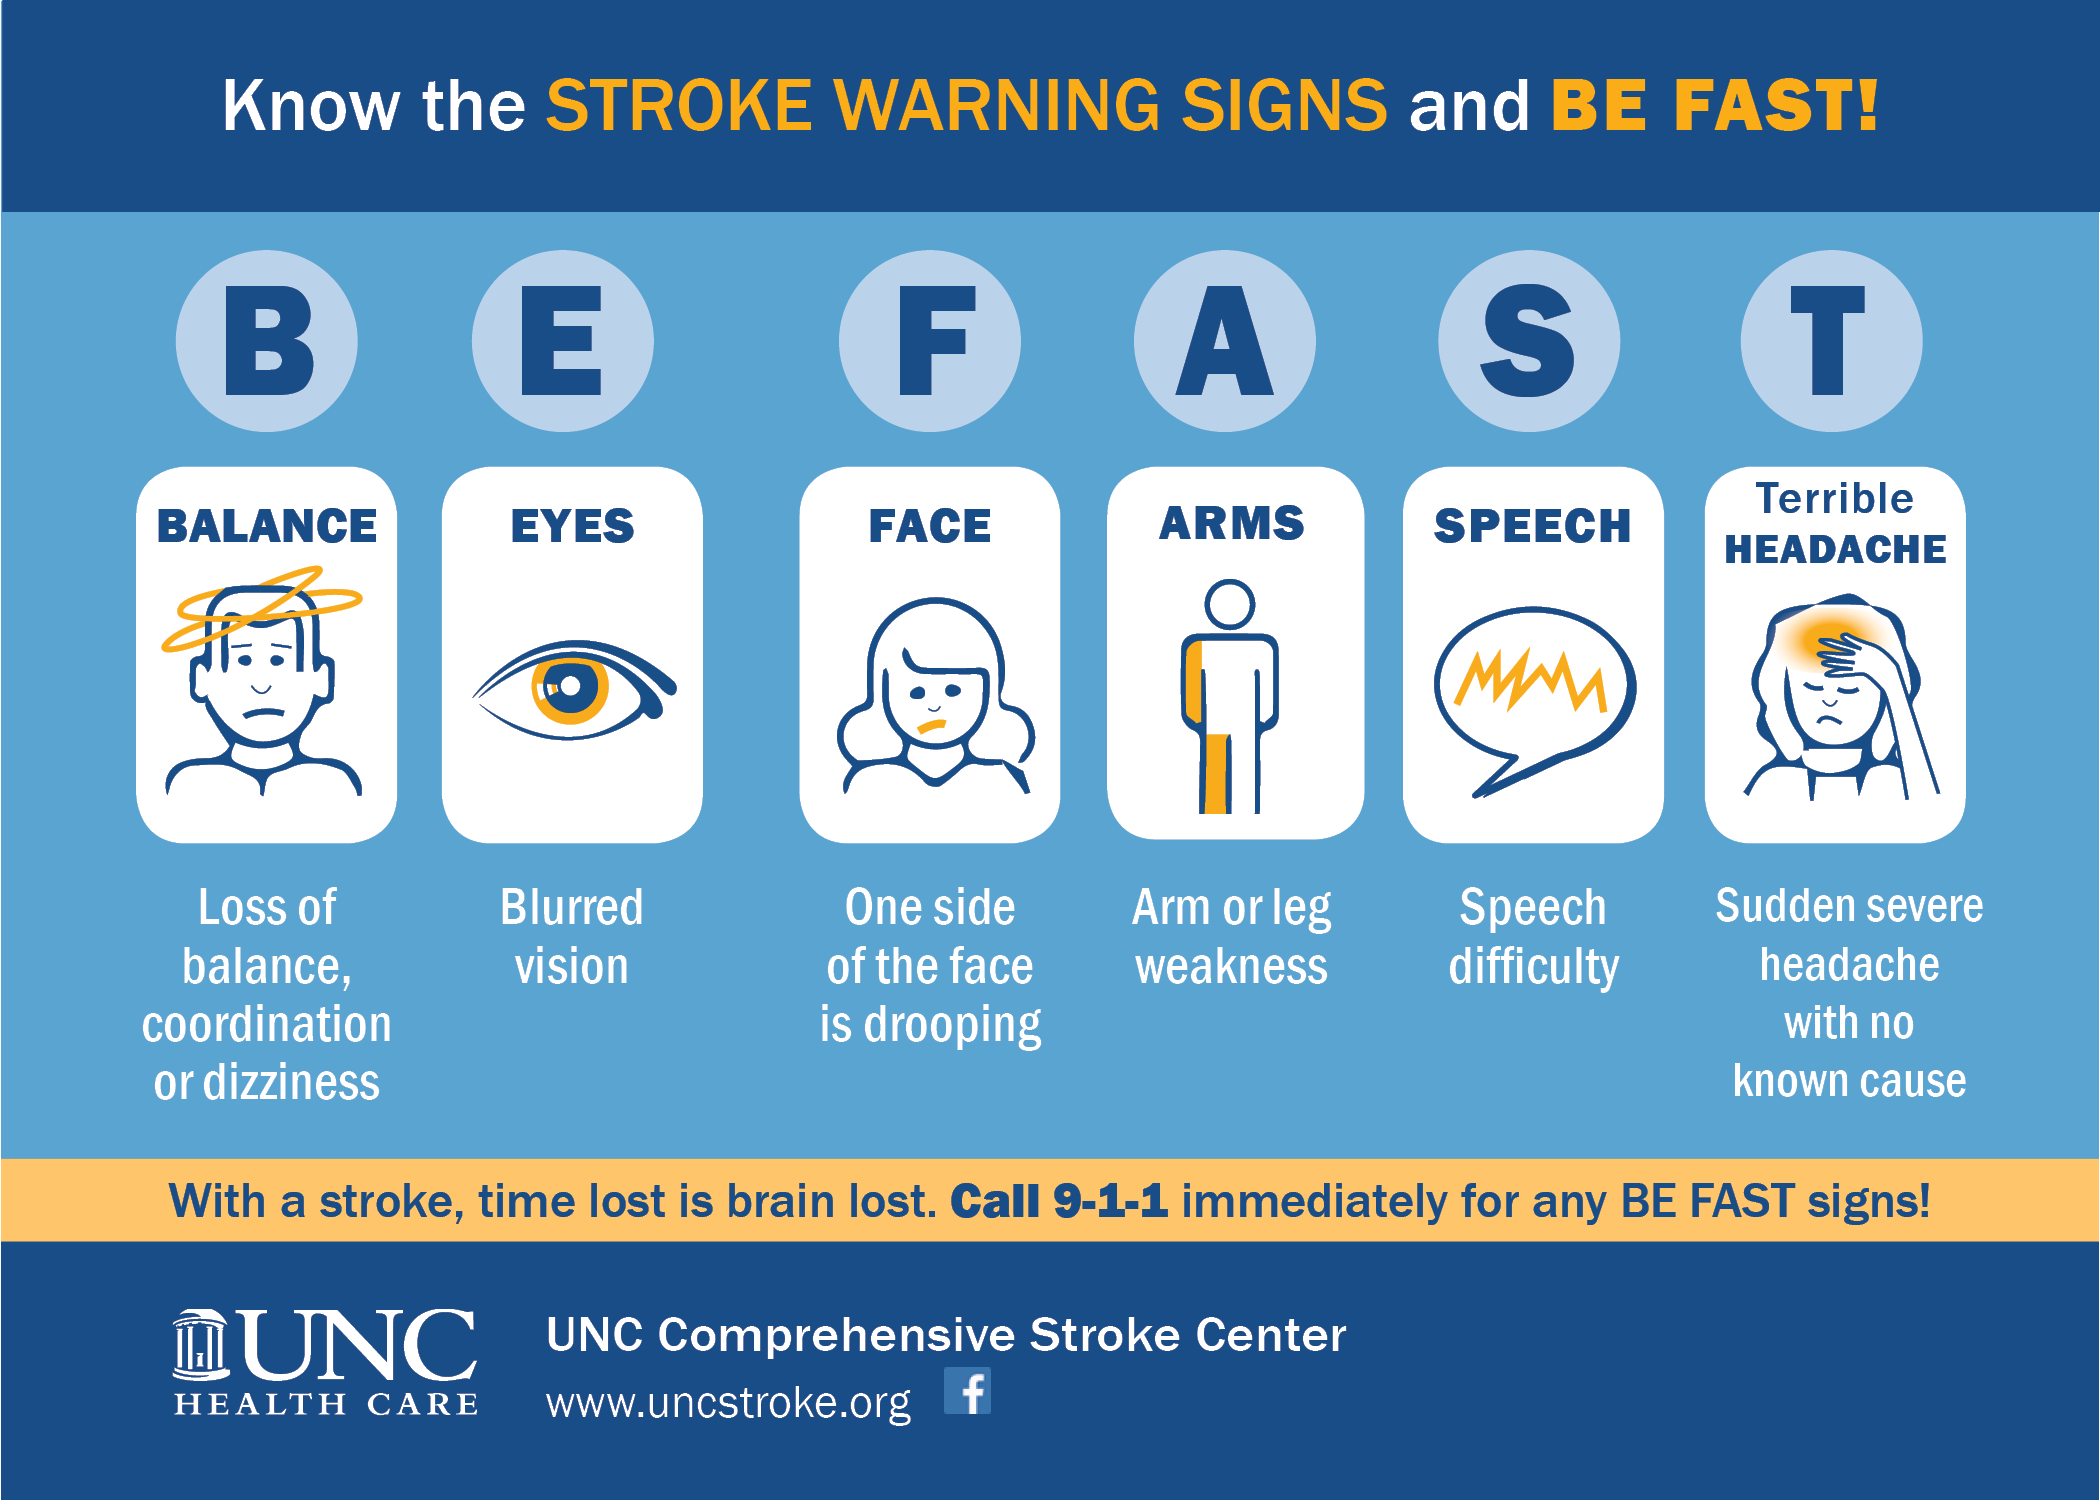 Stroke Warning Signs - loss of balance, trouble seeing, face drooping, sudden numbness in arms, difficulty talking. Call 911.